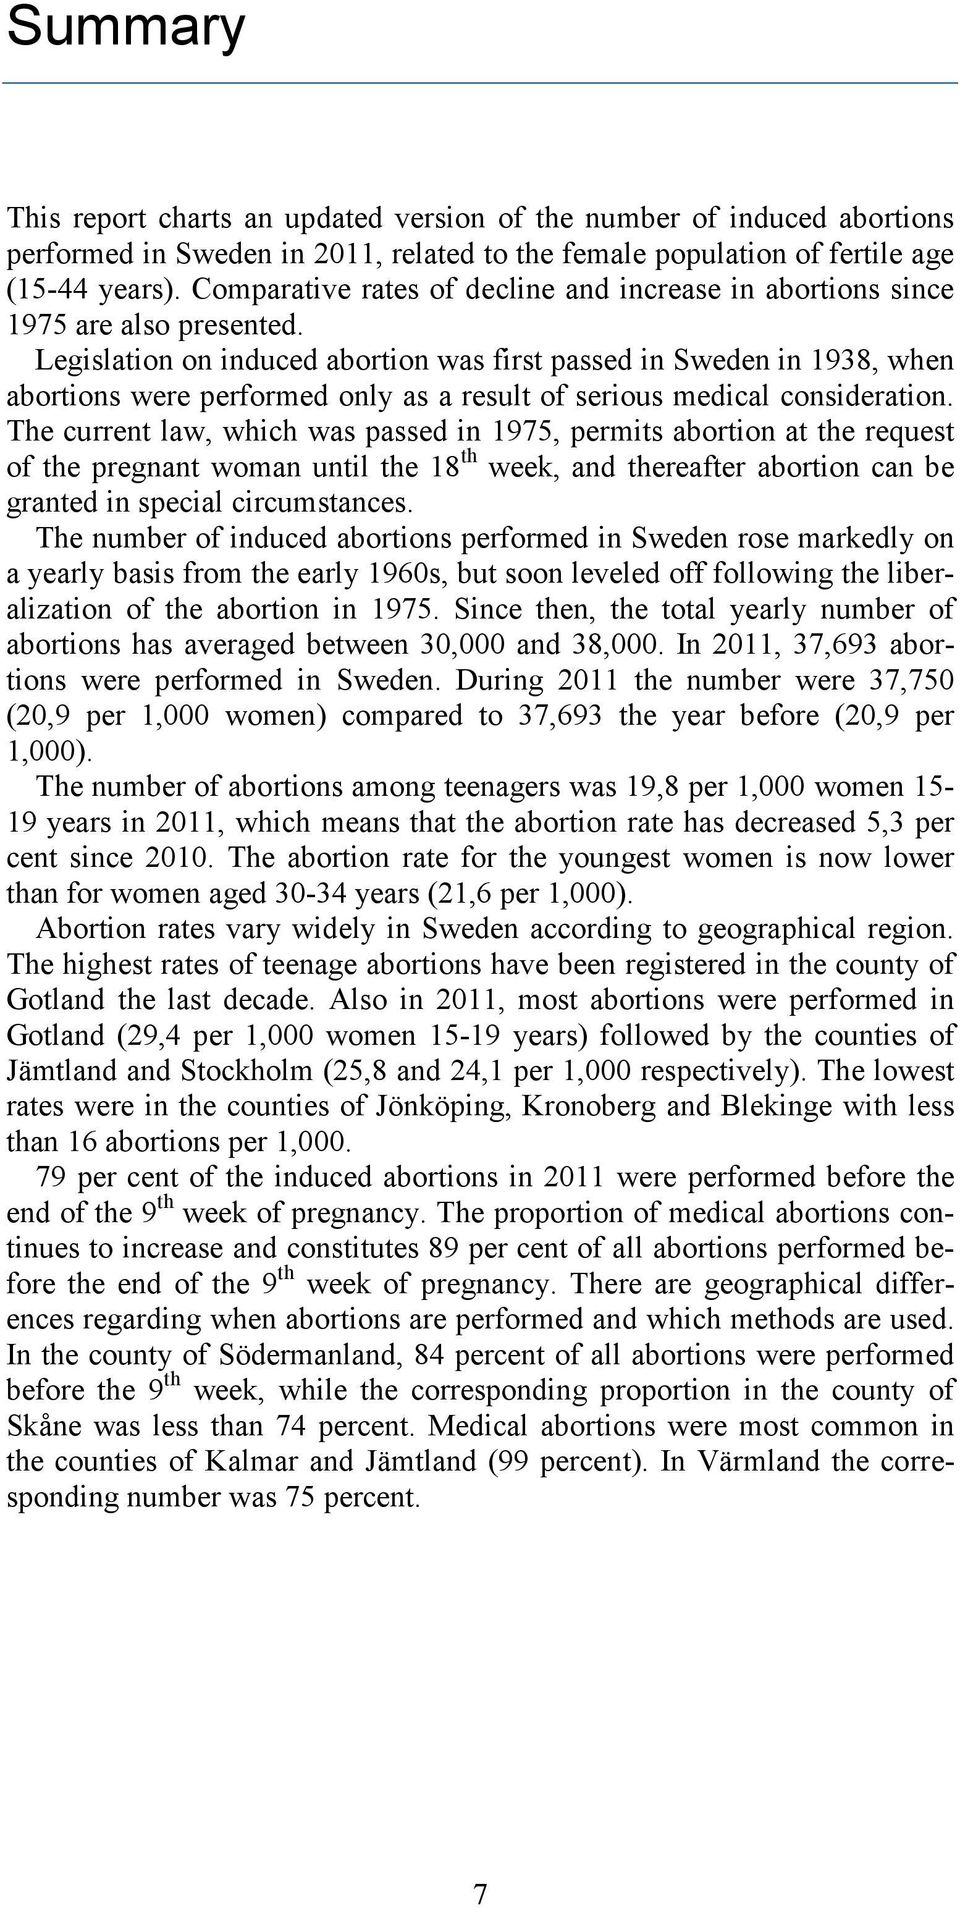 Legislation on induced abortion was first passed in Sweden in 1938, when abortions were performed only as a result of serious medical consideration.